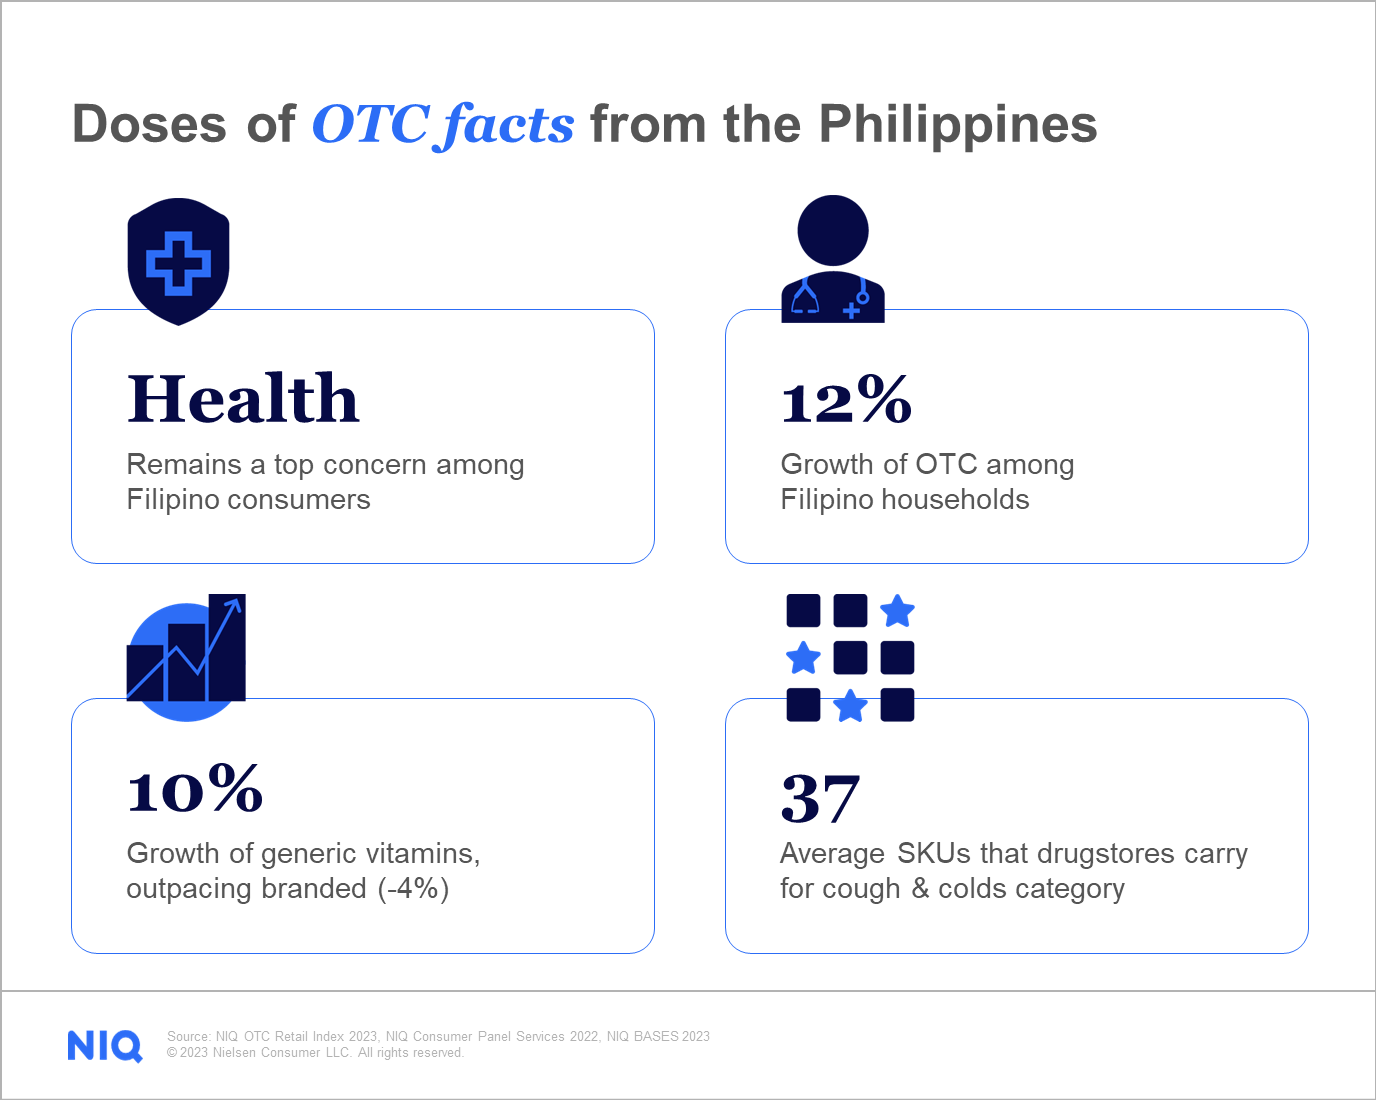 Shows a snapshot of relevant retail data on over-the-counter (OTC) medicines in the Philippines